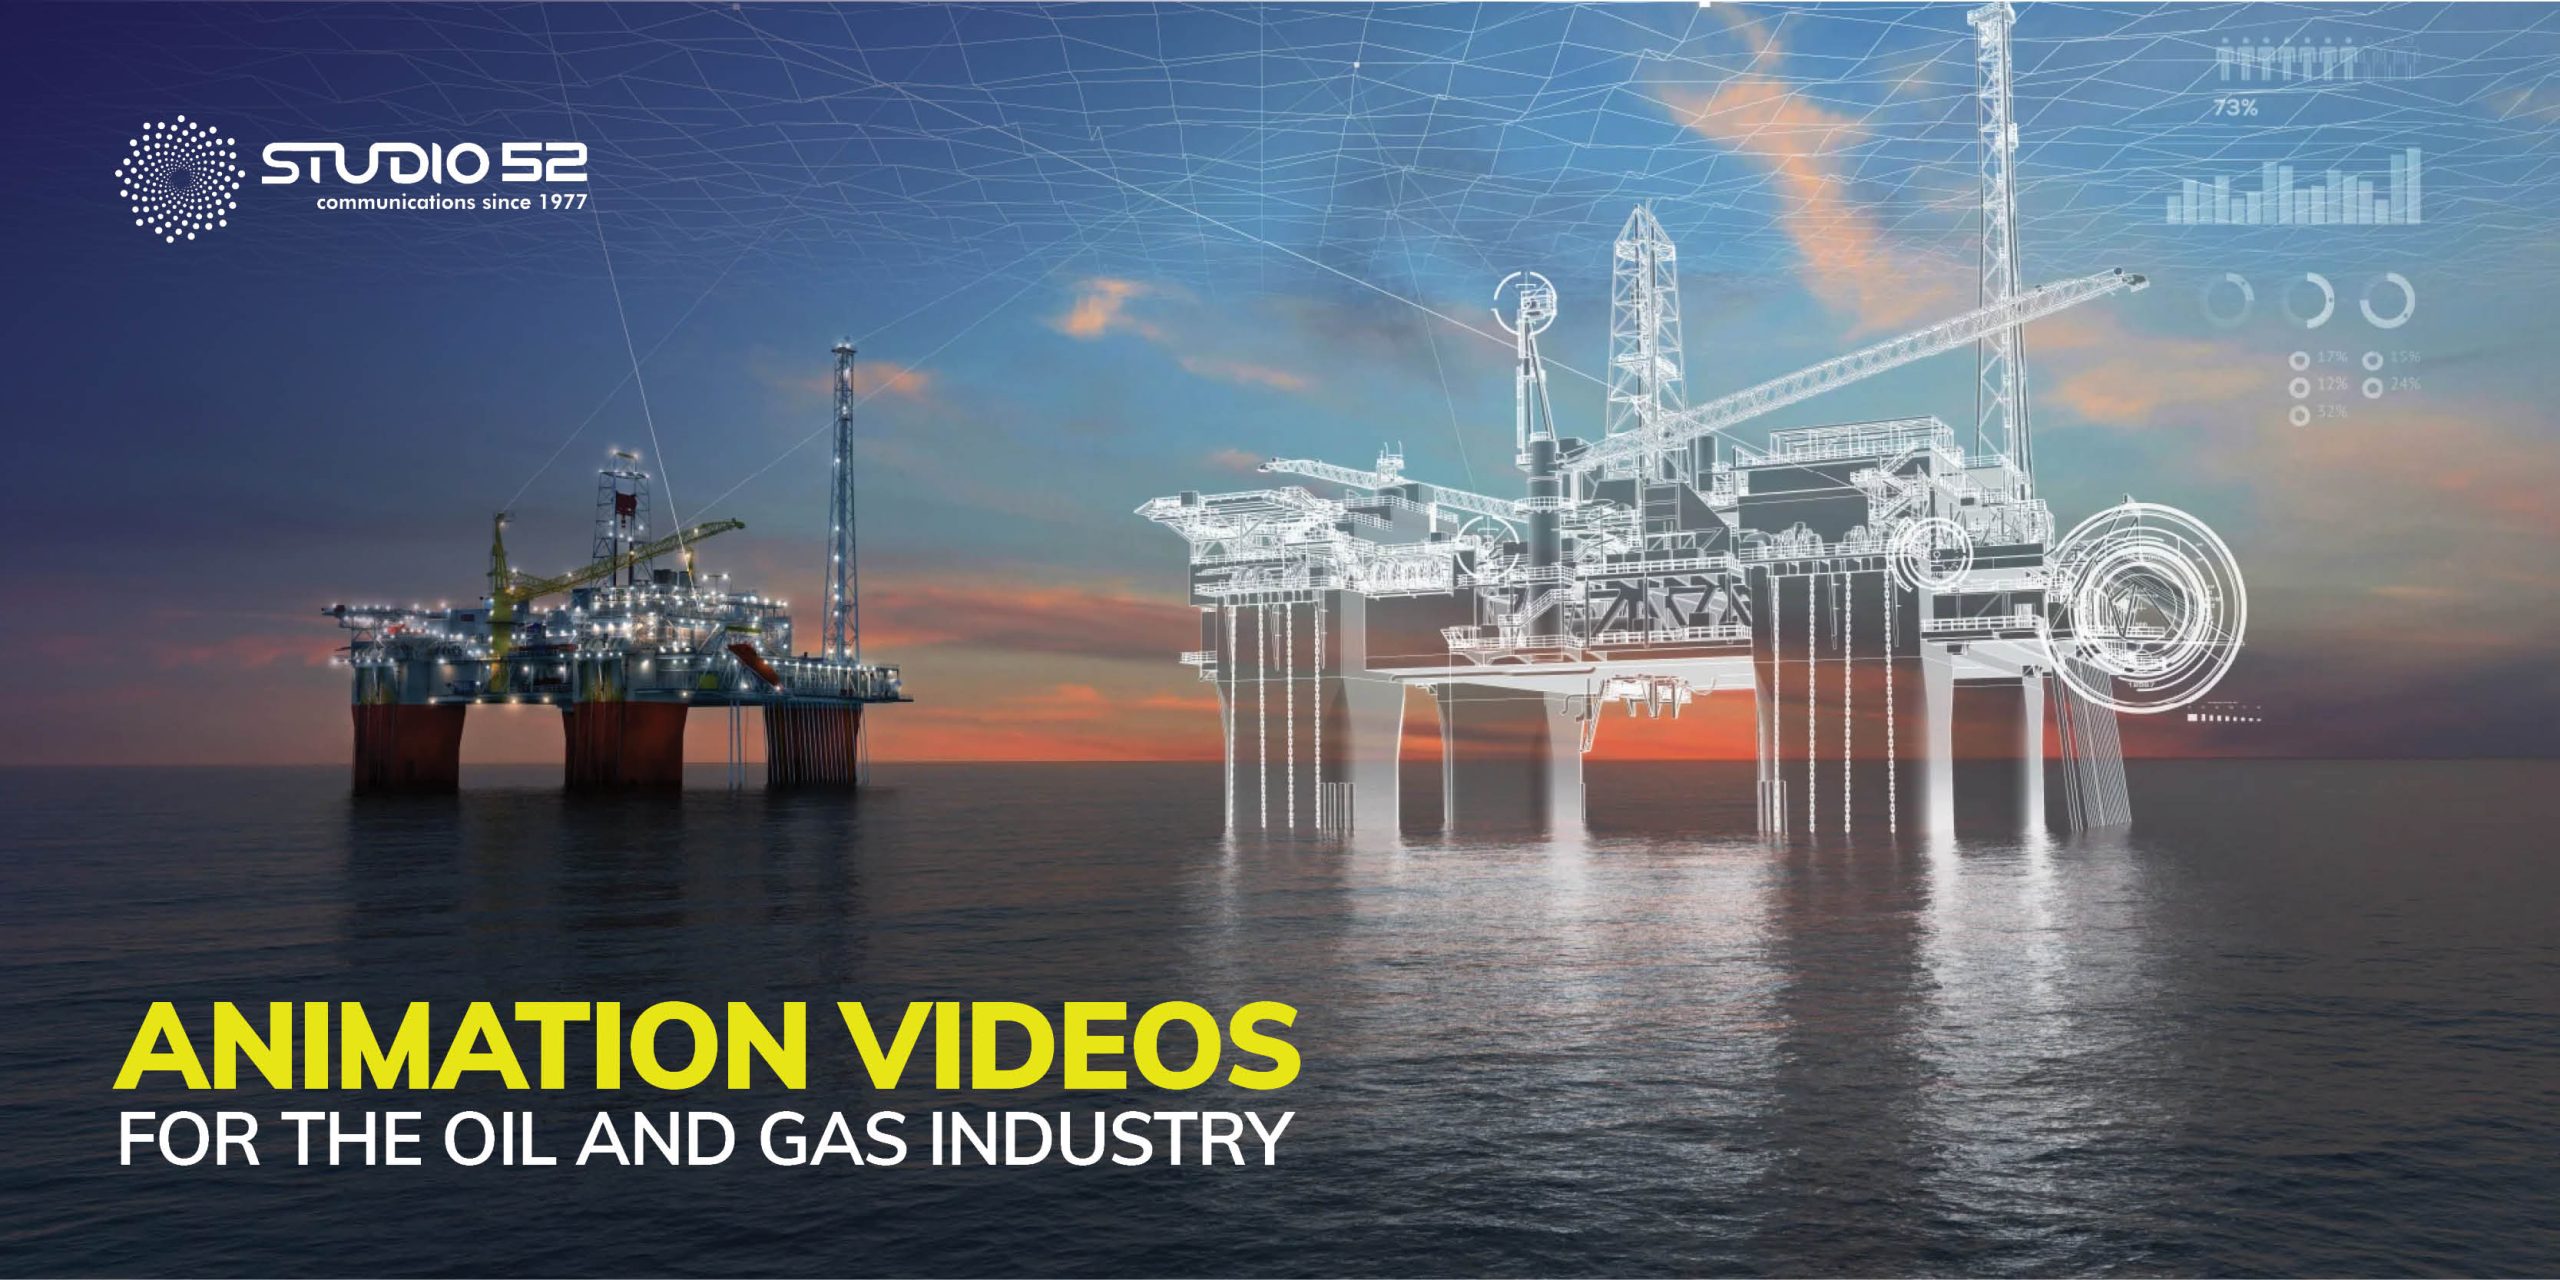 Animation Video for the Oil & Gas Industry - Studio 52